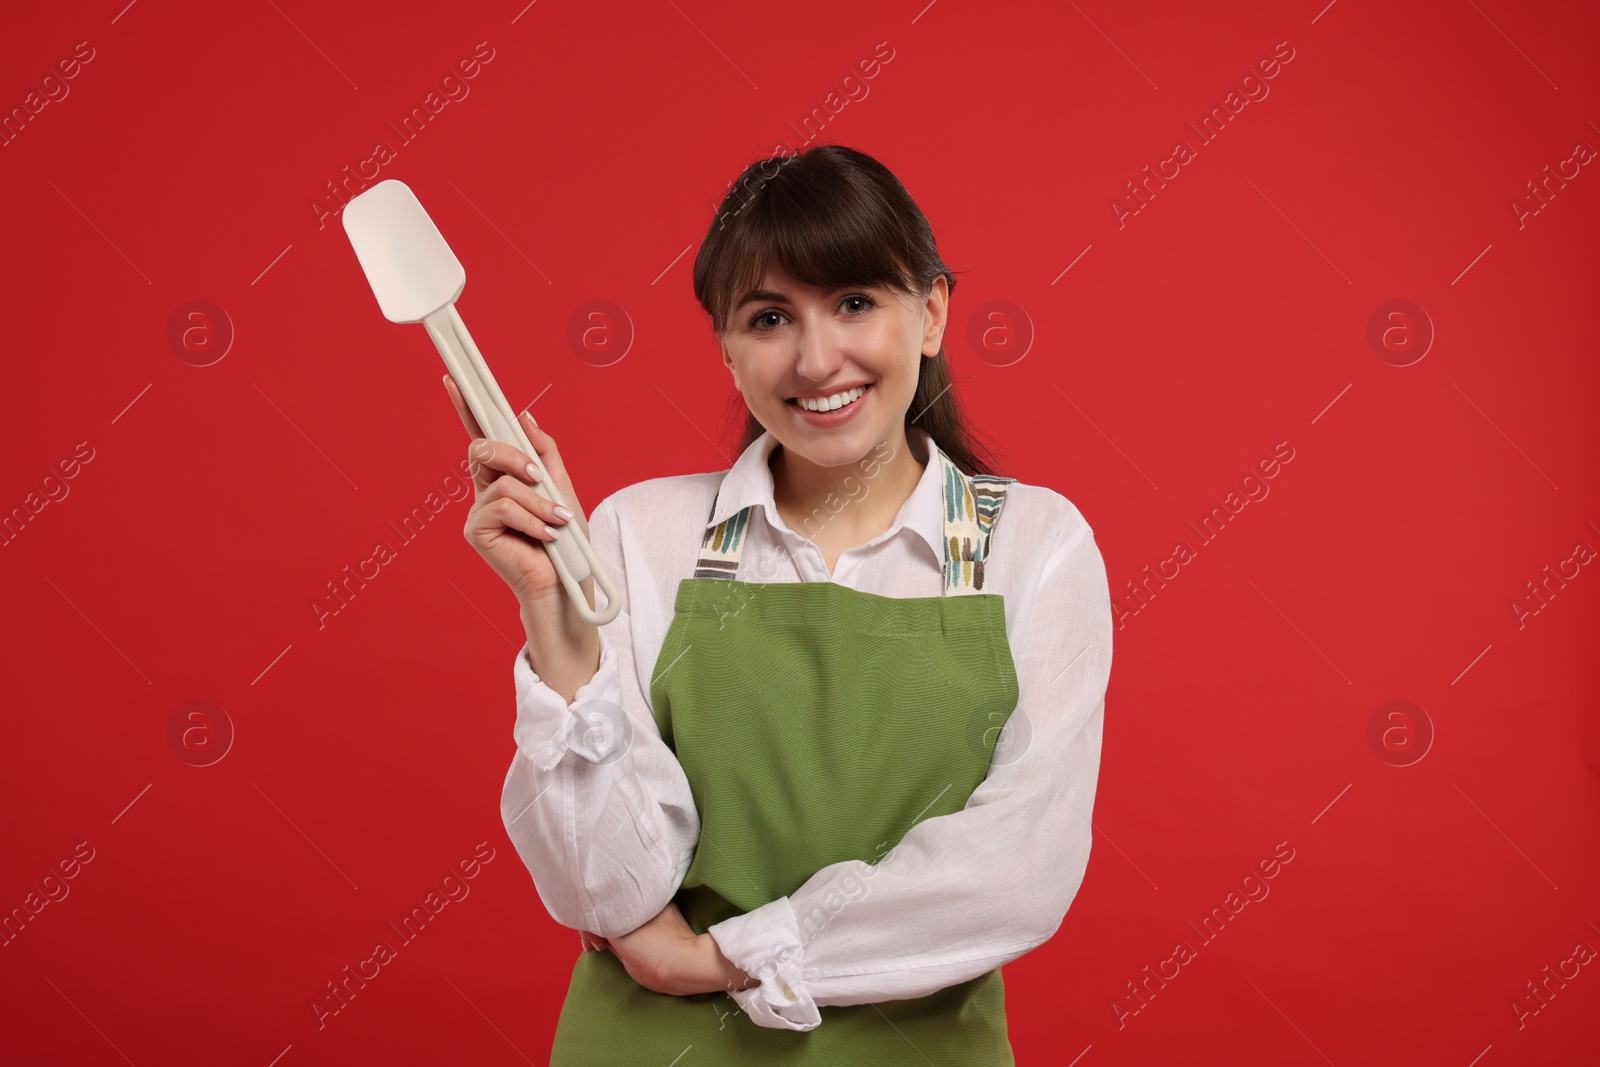 Photo of Happy professional confectioner in apron holding spatula on red background